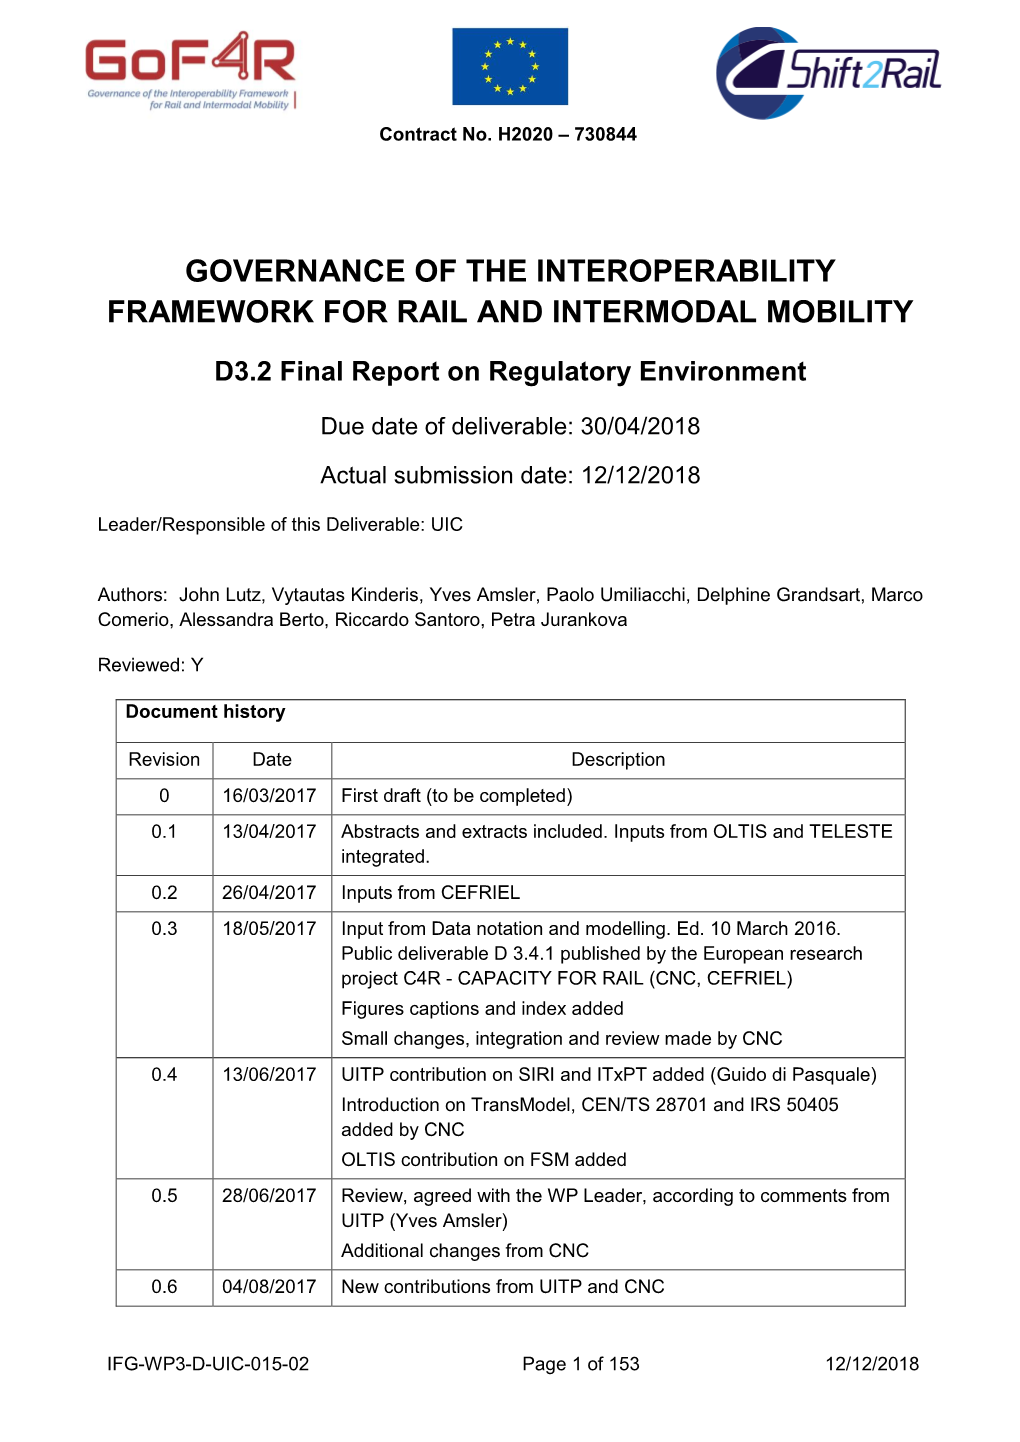 Governance of the Interoperability Framework for Rail and Intermodal Mobility